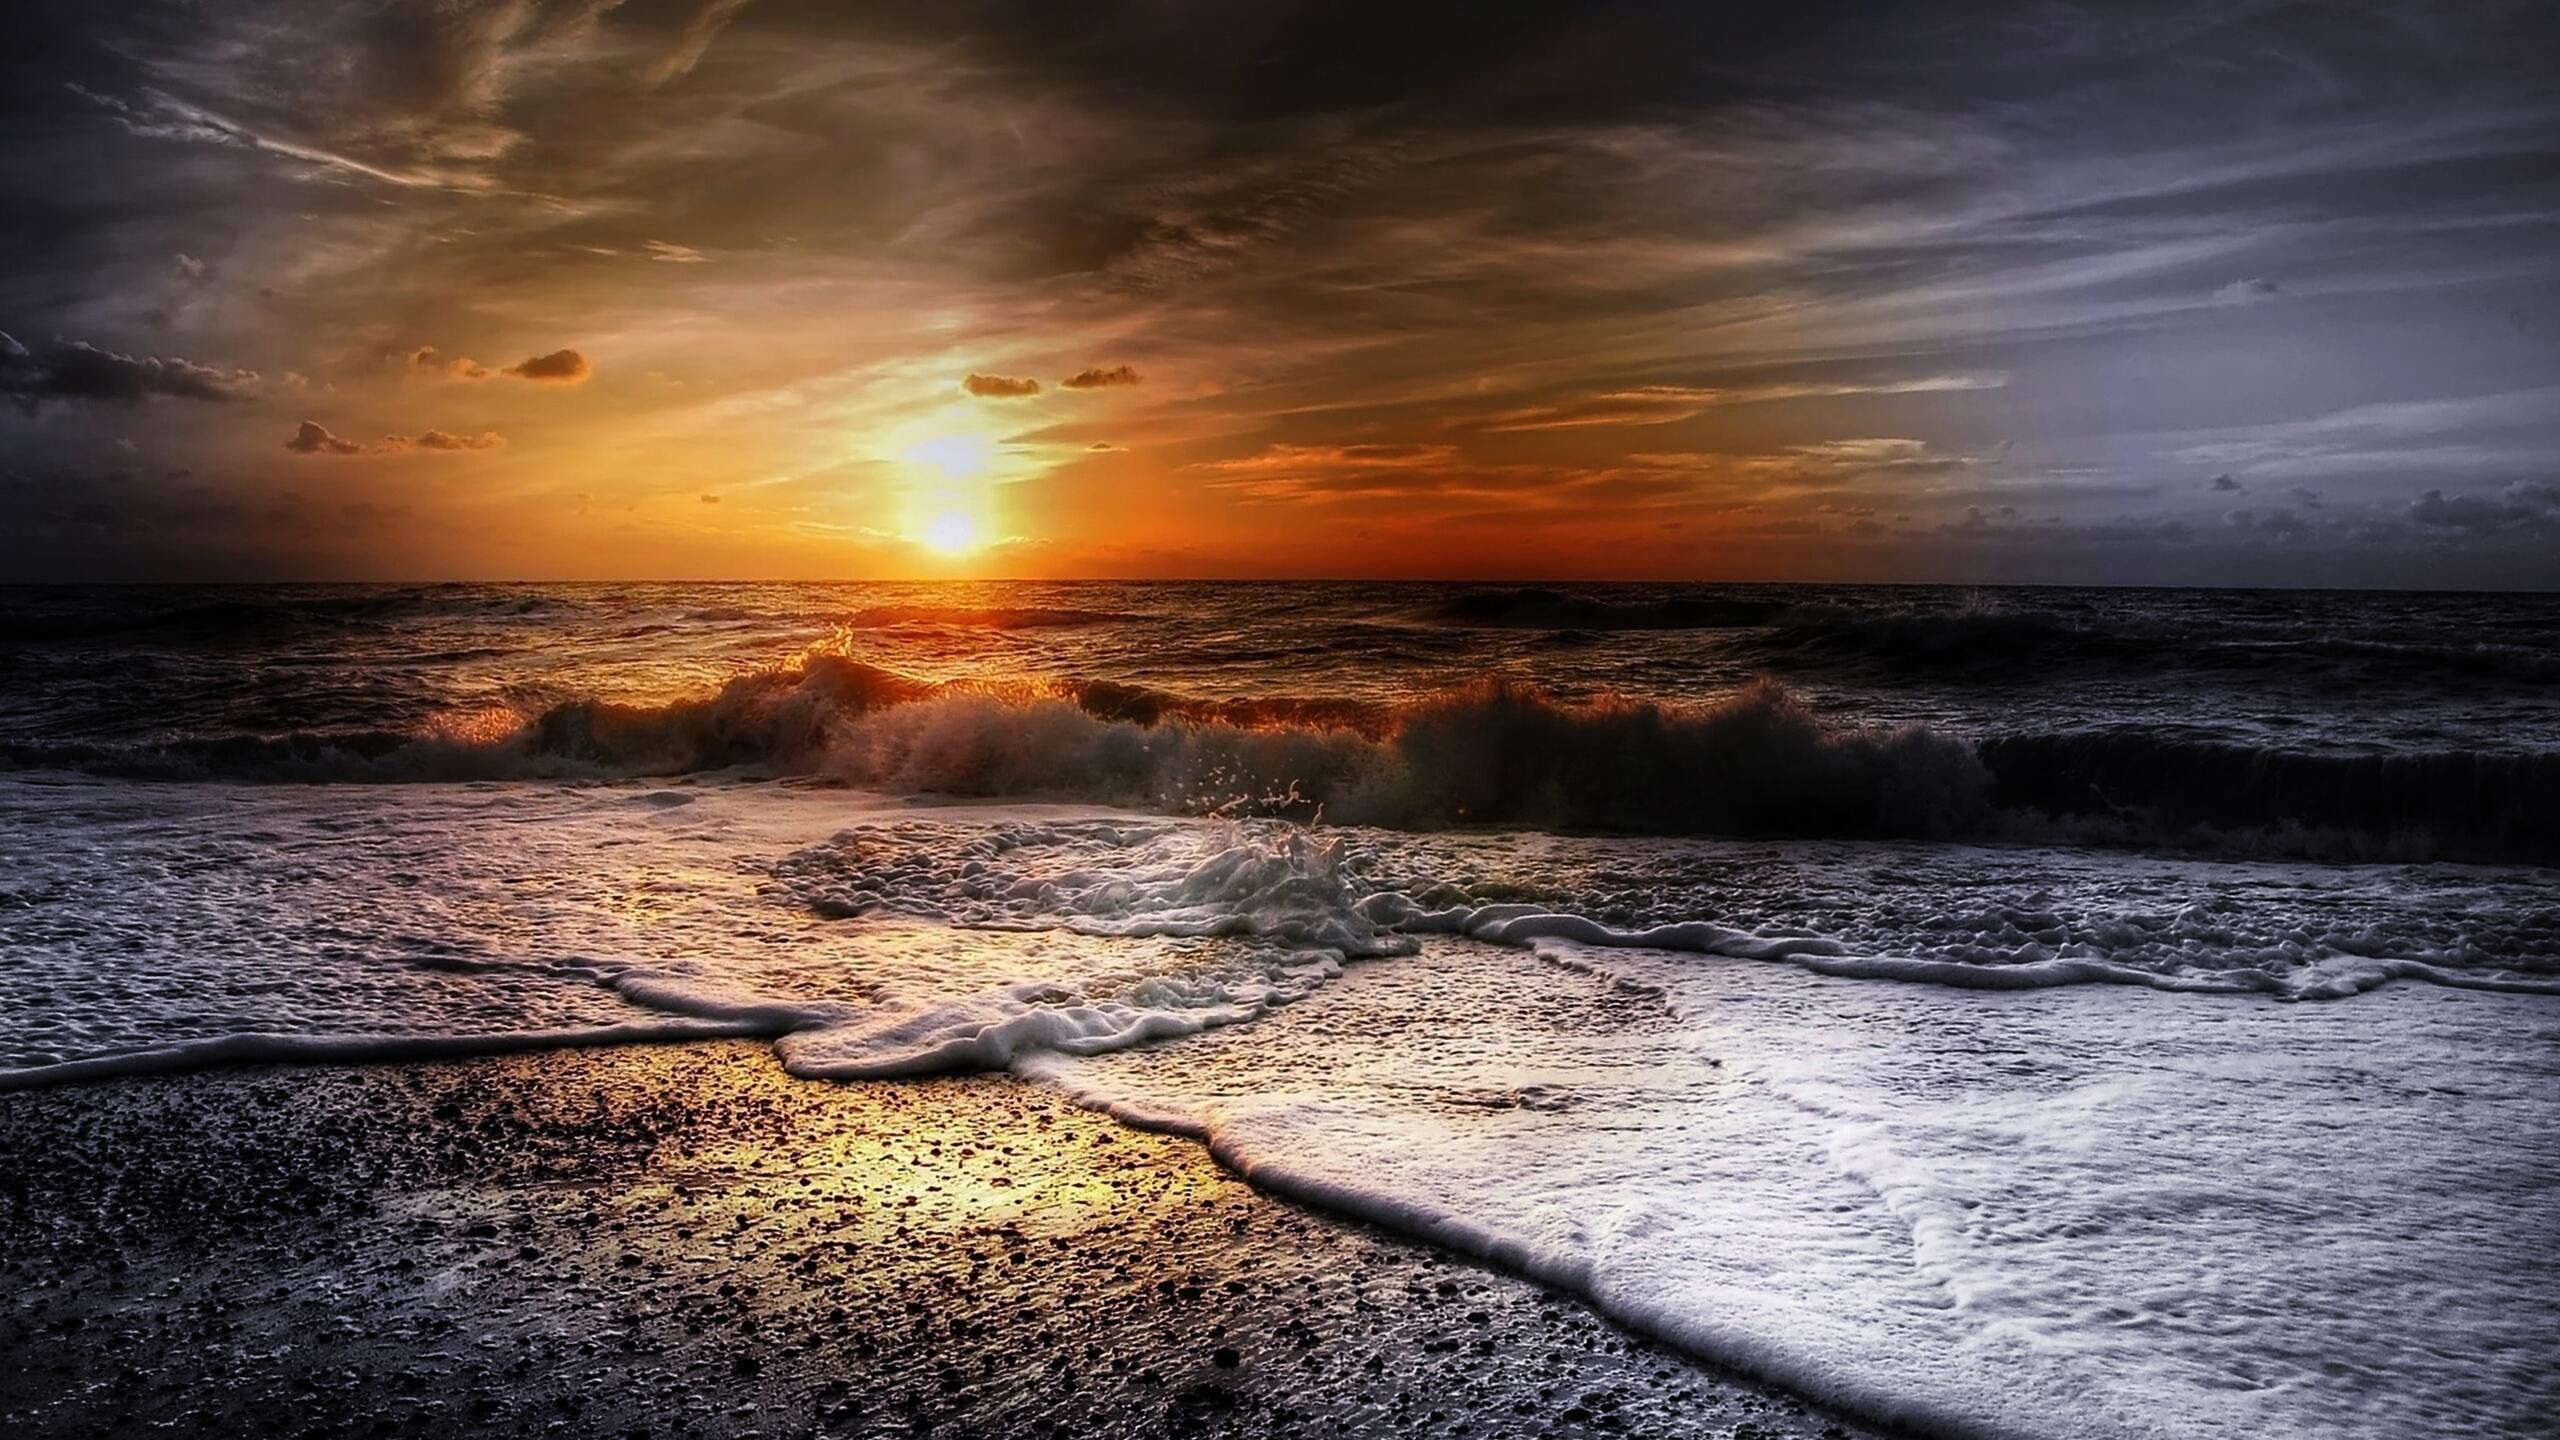 Beach Summer Sunset Waves 1440P Resolution HD 4k Wallpaper, Image, Background, Photo and Picture